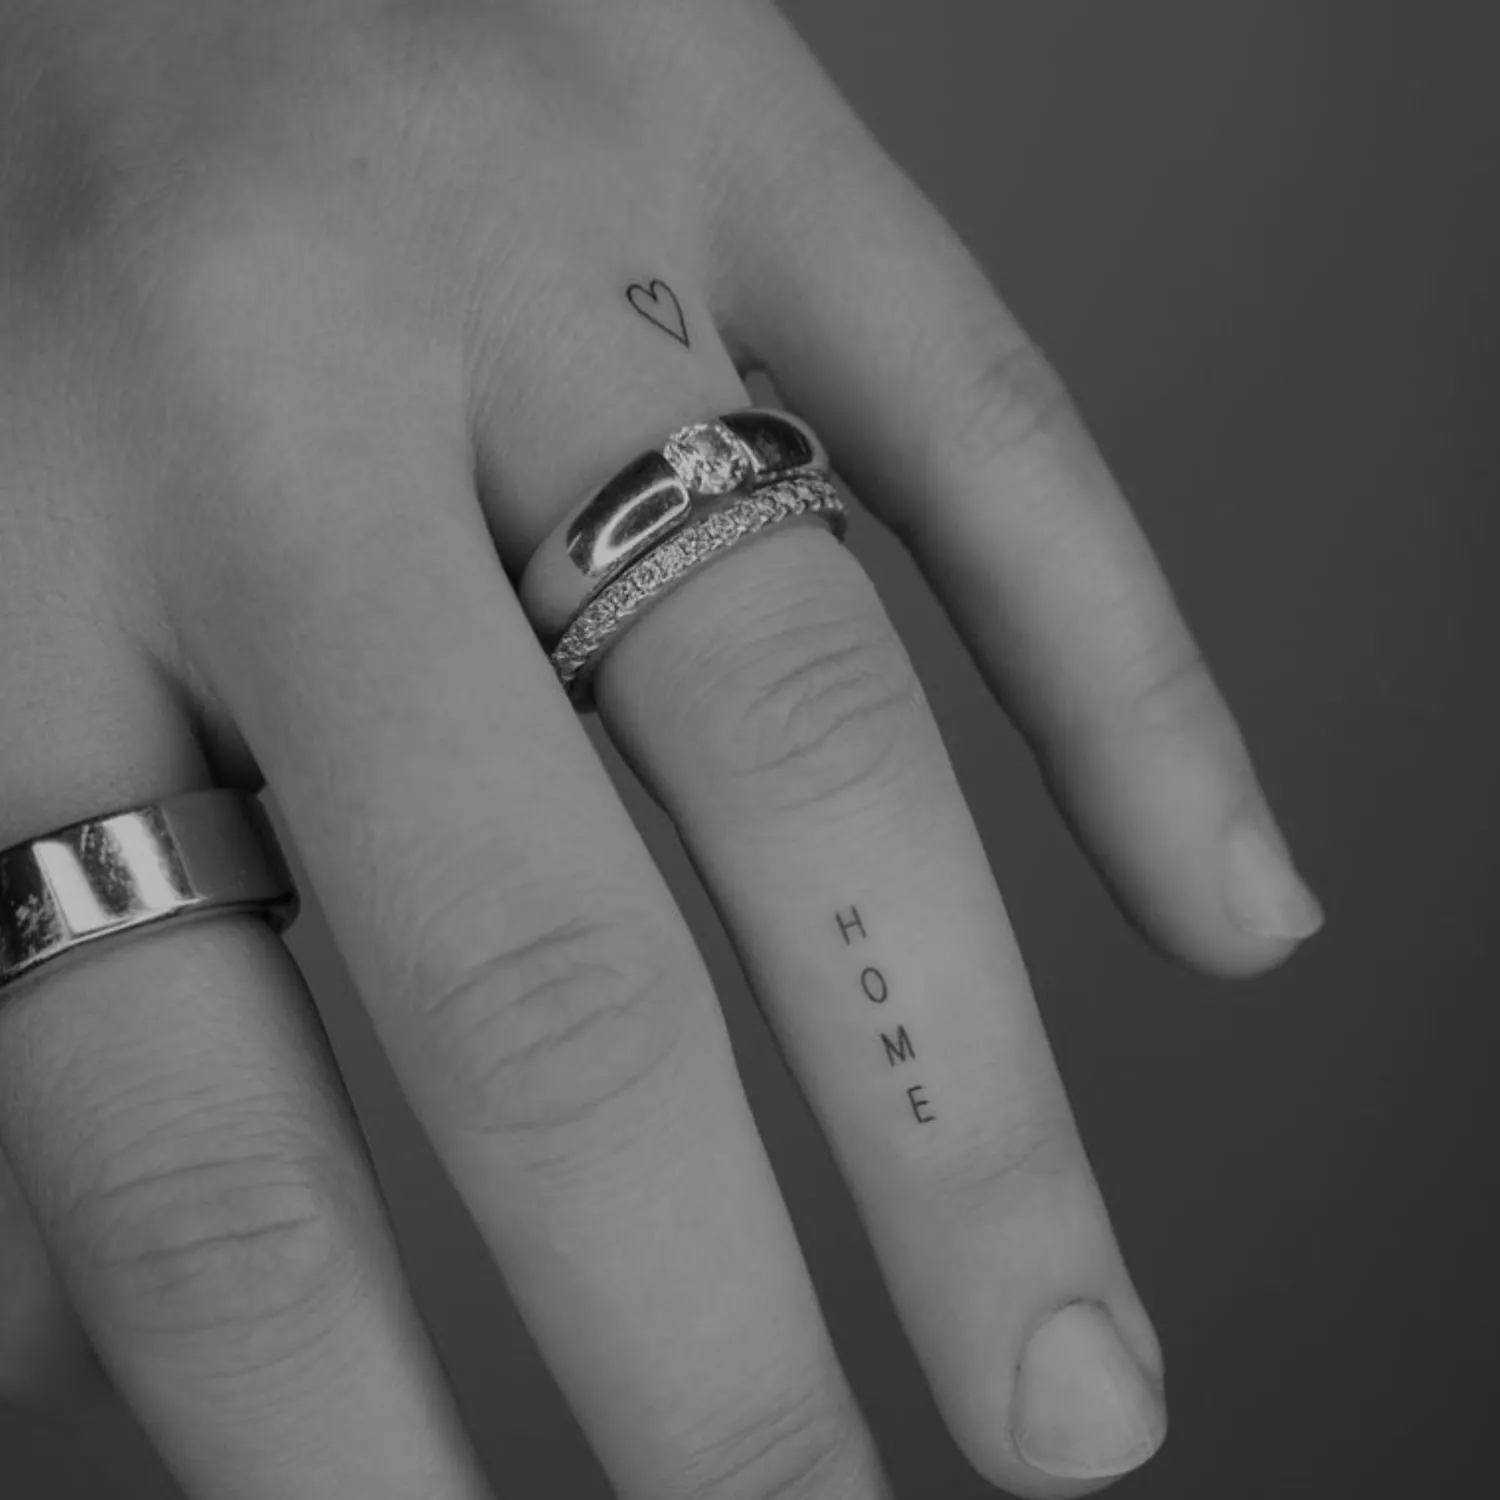 A tiny heart tattoo on the top part of the ring finger.